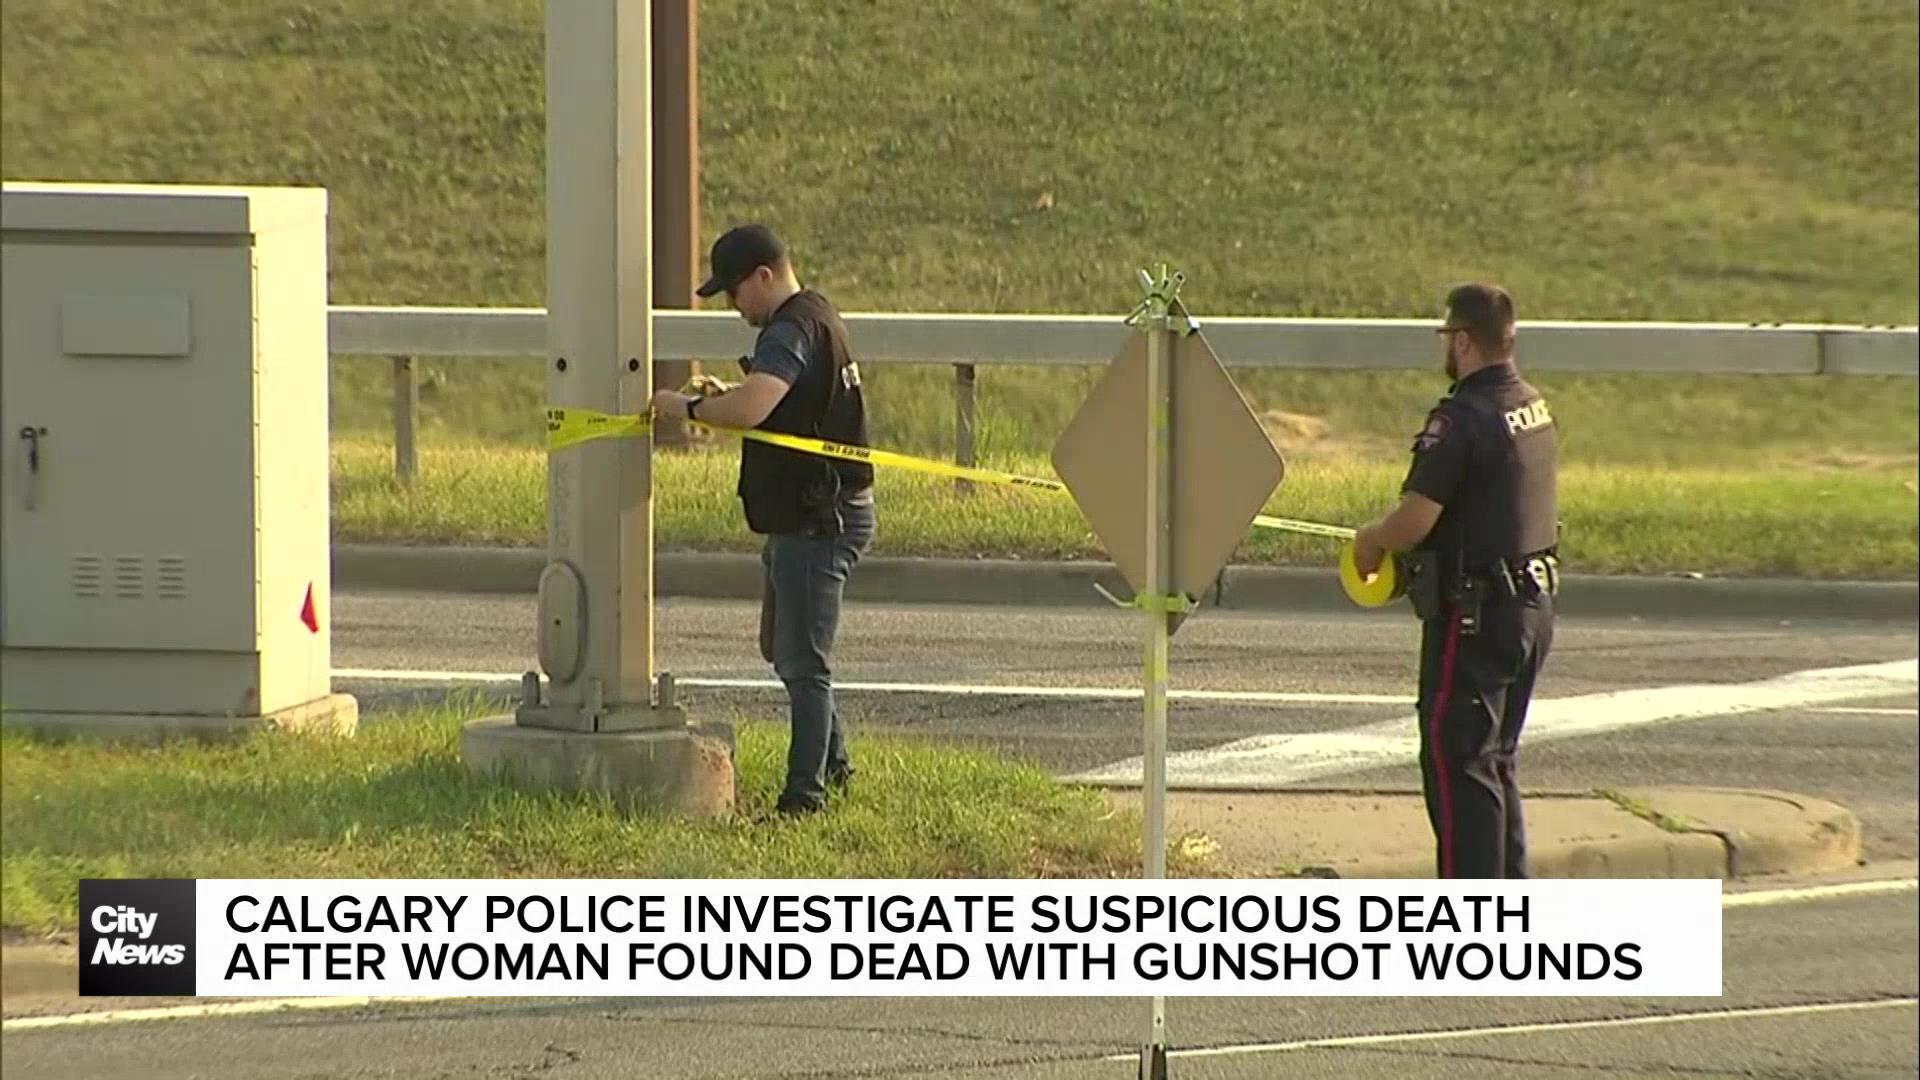 Woman found dead with gunshot wounds, Calgary police investigating